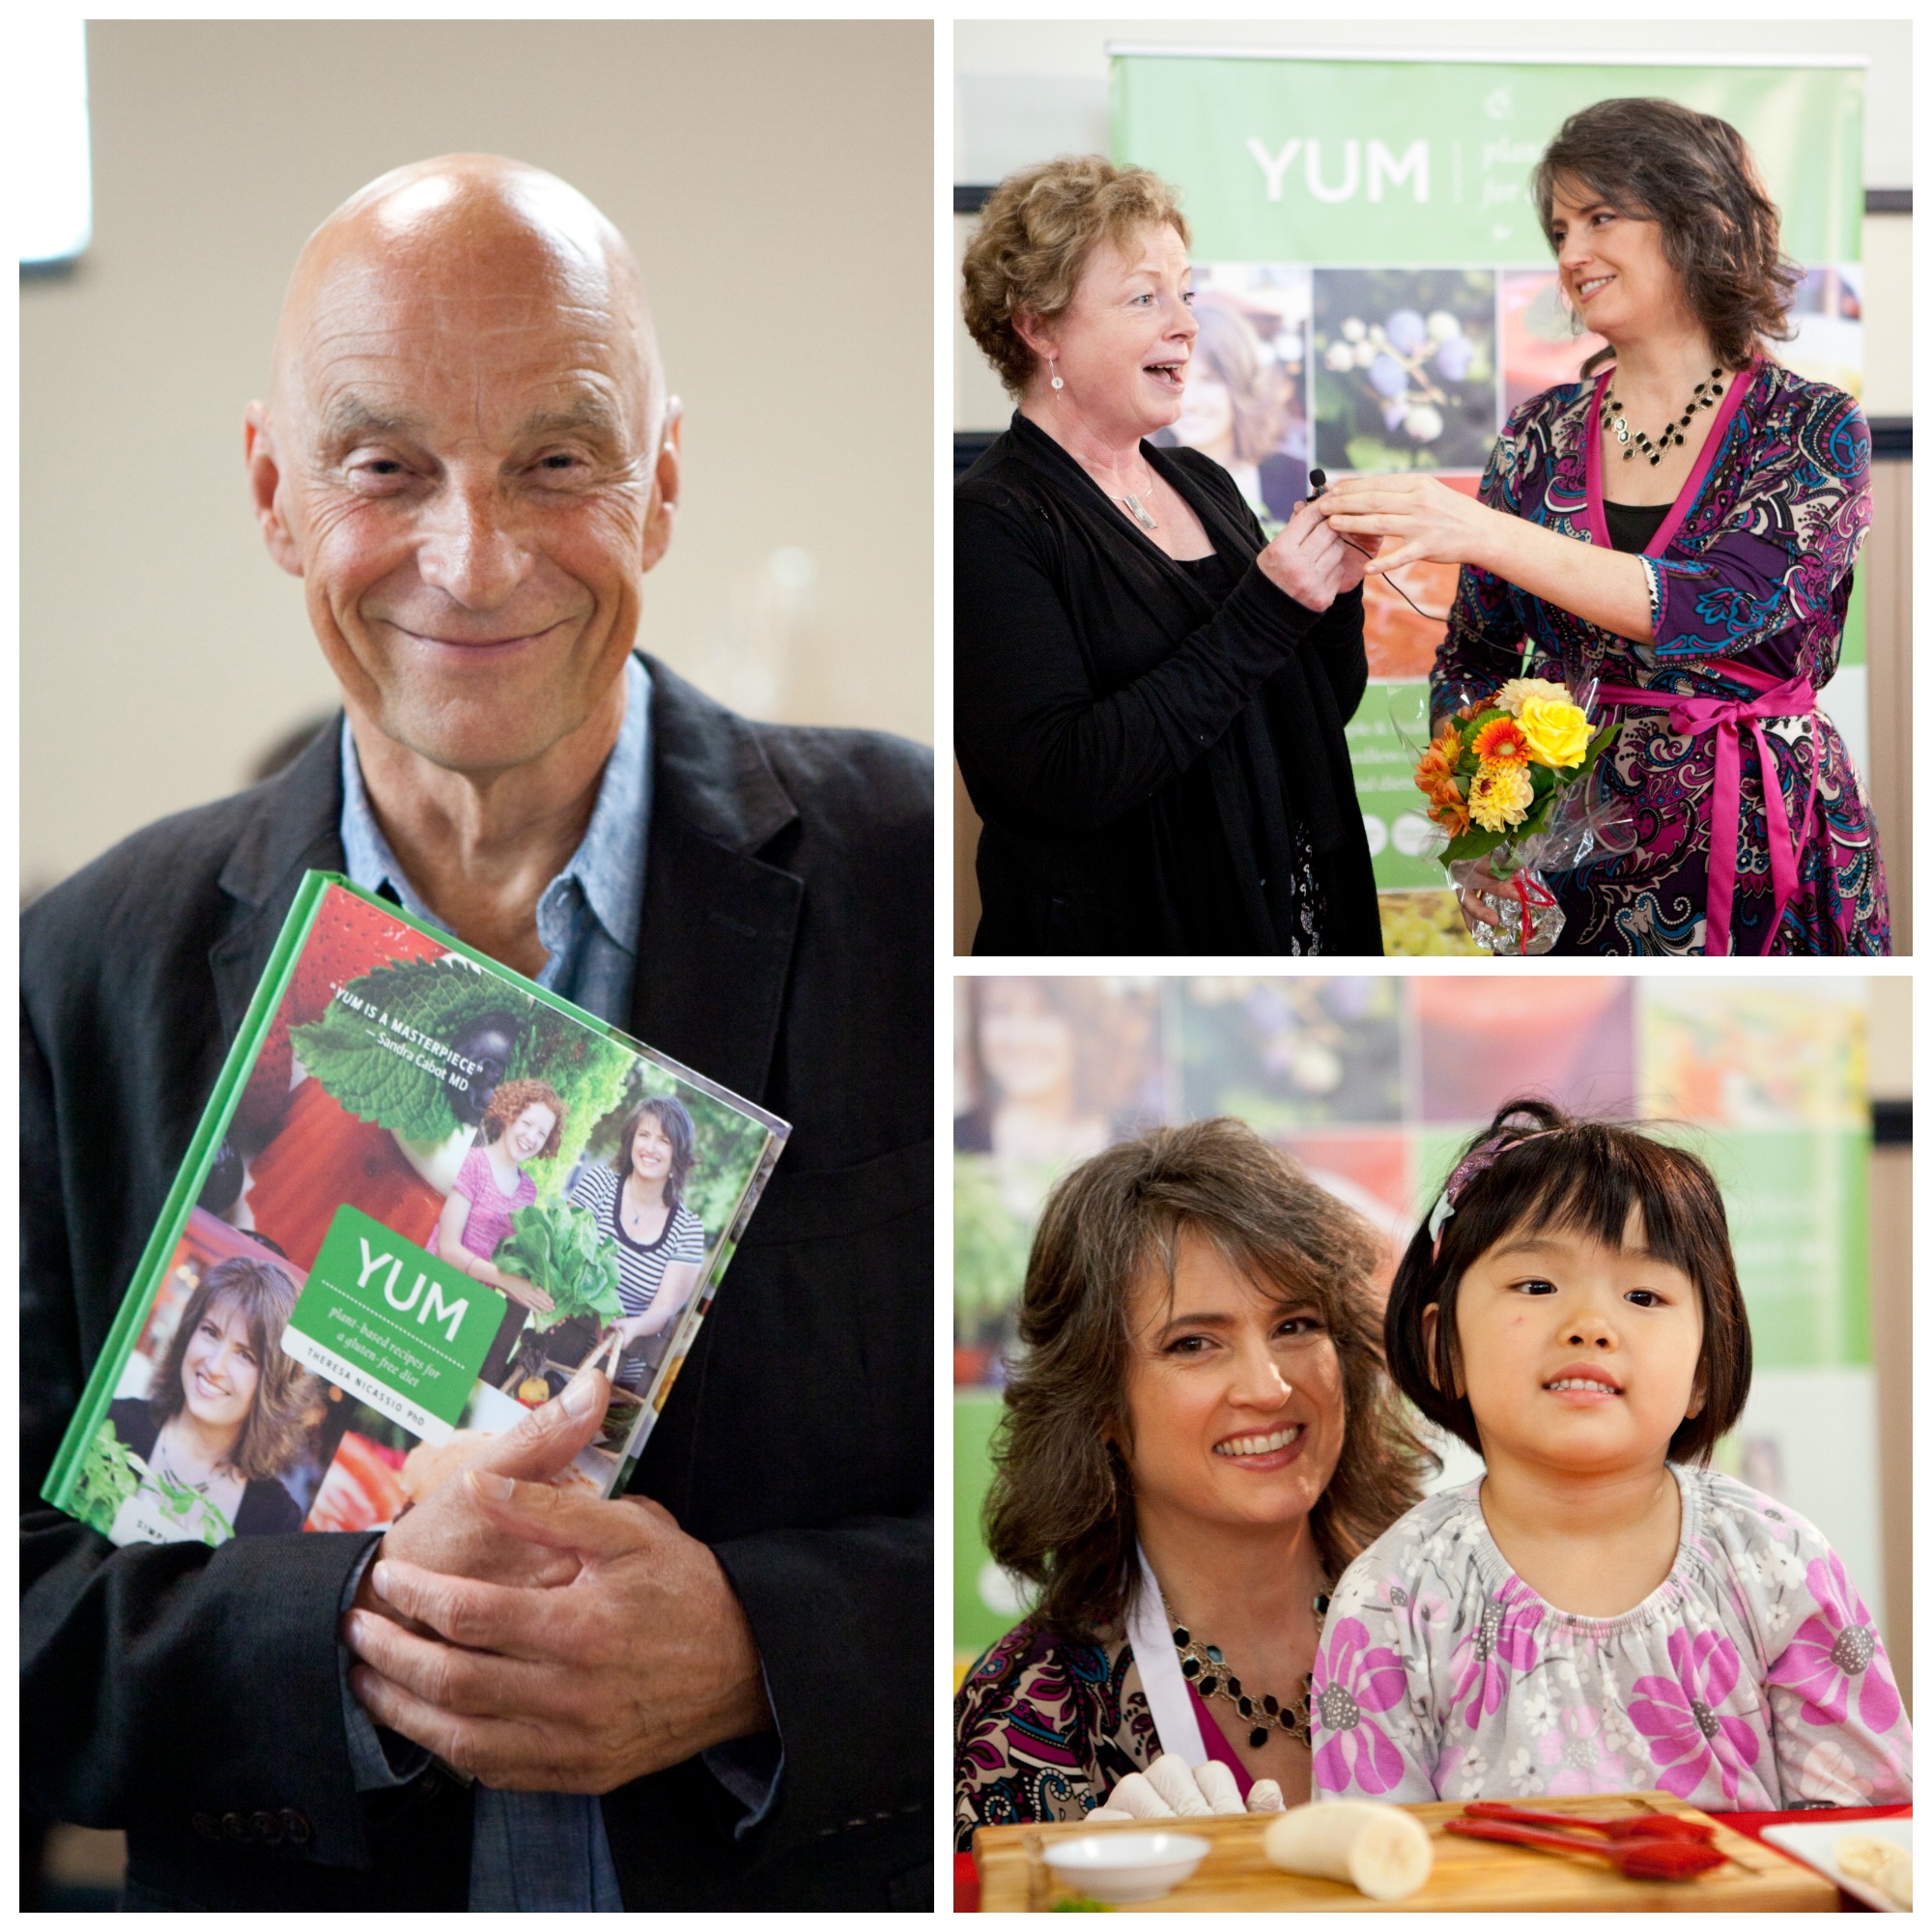 PSYCHOLOGIST/CHEF RELEASES SPECIAL DIET COOKBOOK Dr. Theresa Nicassio’s highly original cookbook “YUM” fills the gap for those with food allergies & sensitivities creating a comprehensive resource, a true masterpiece.